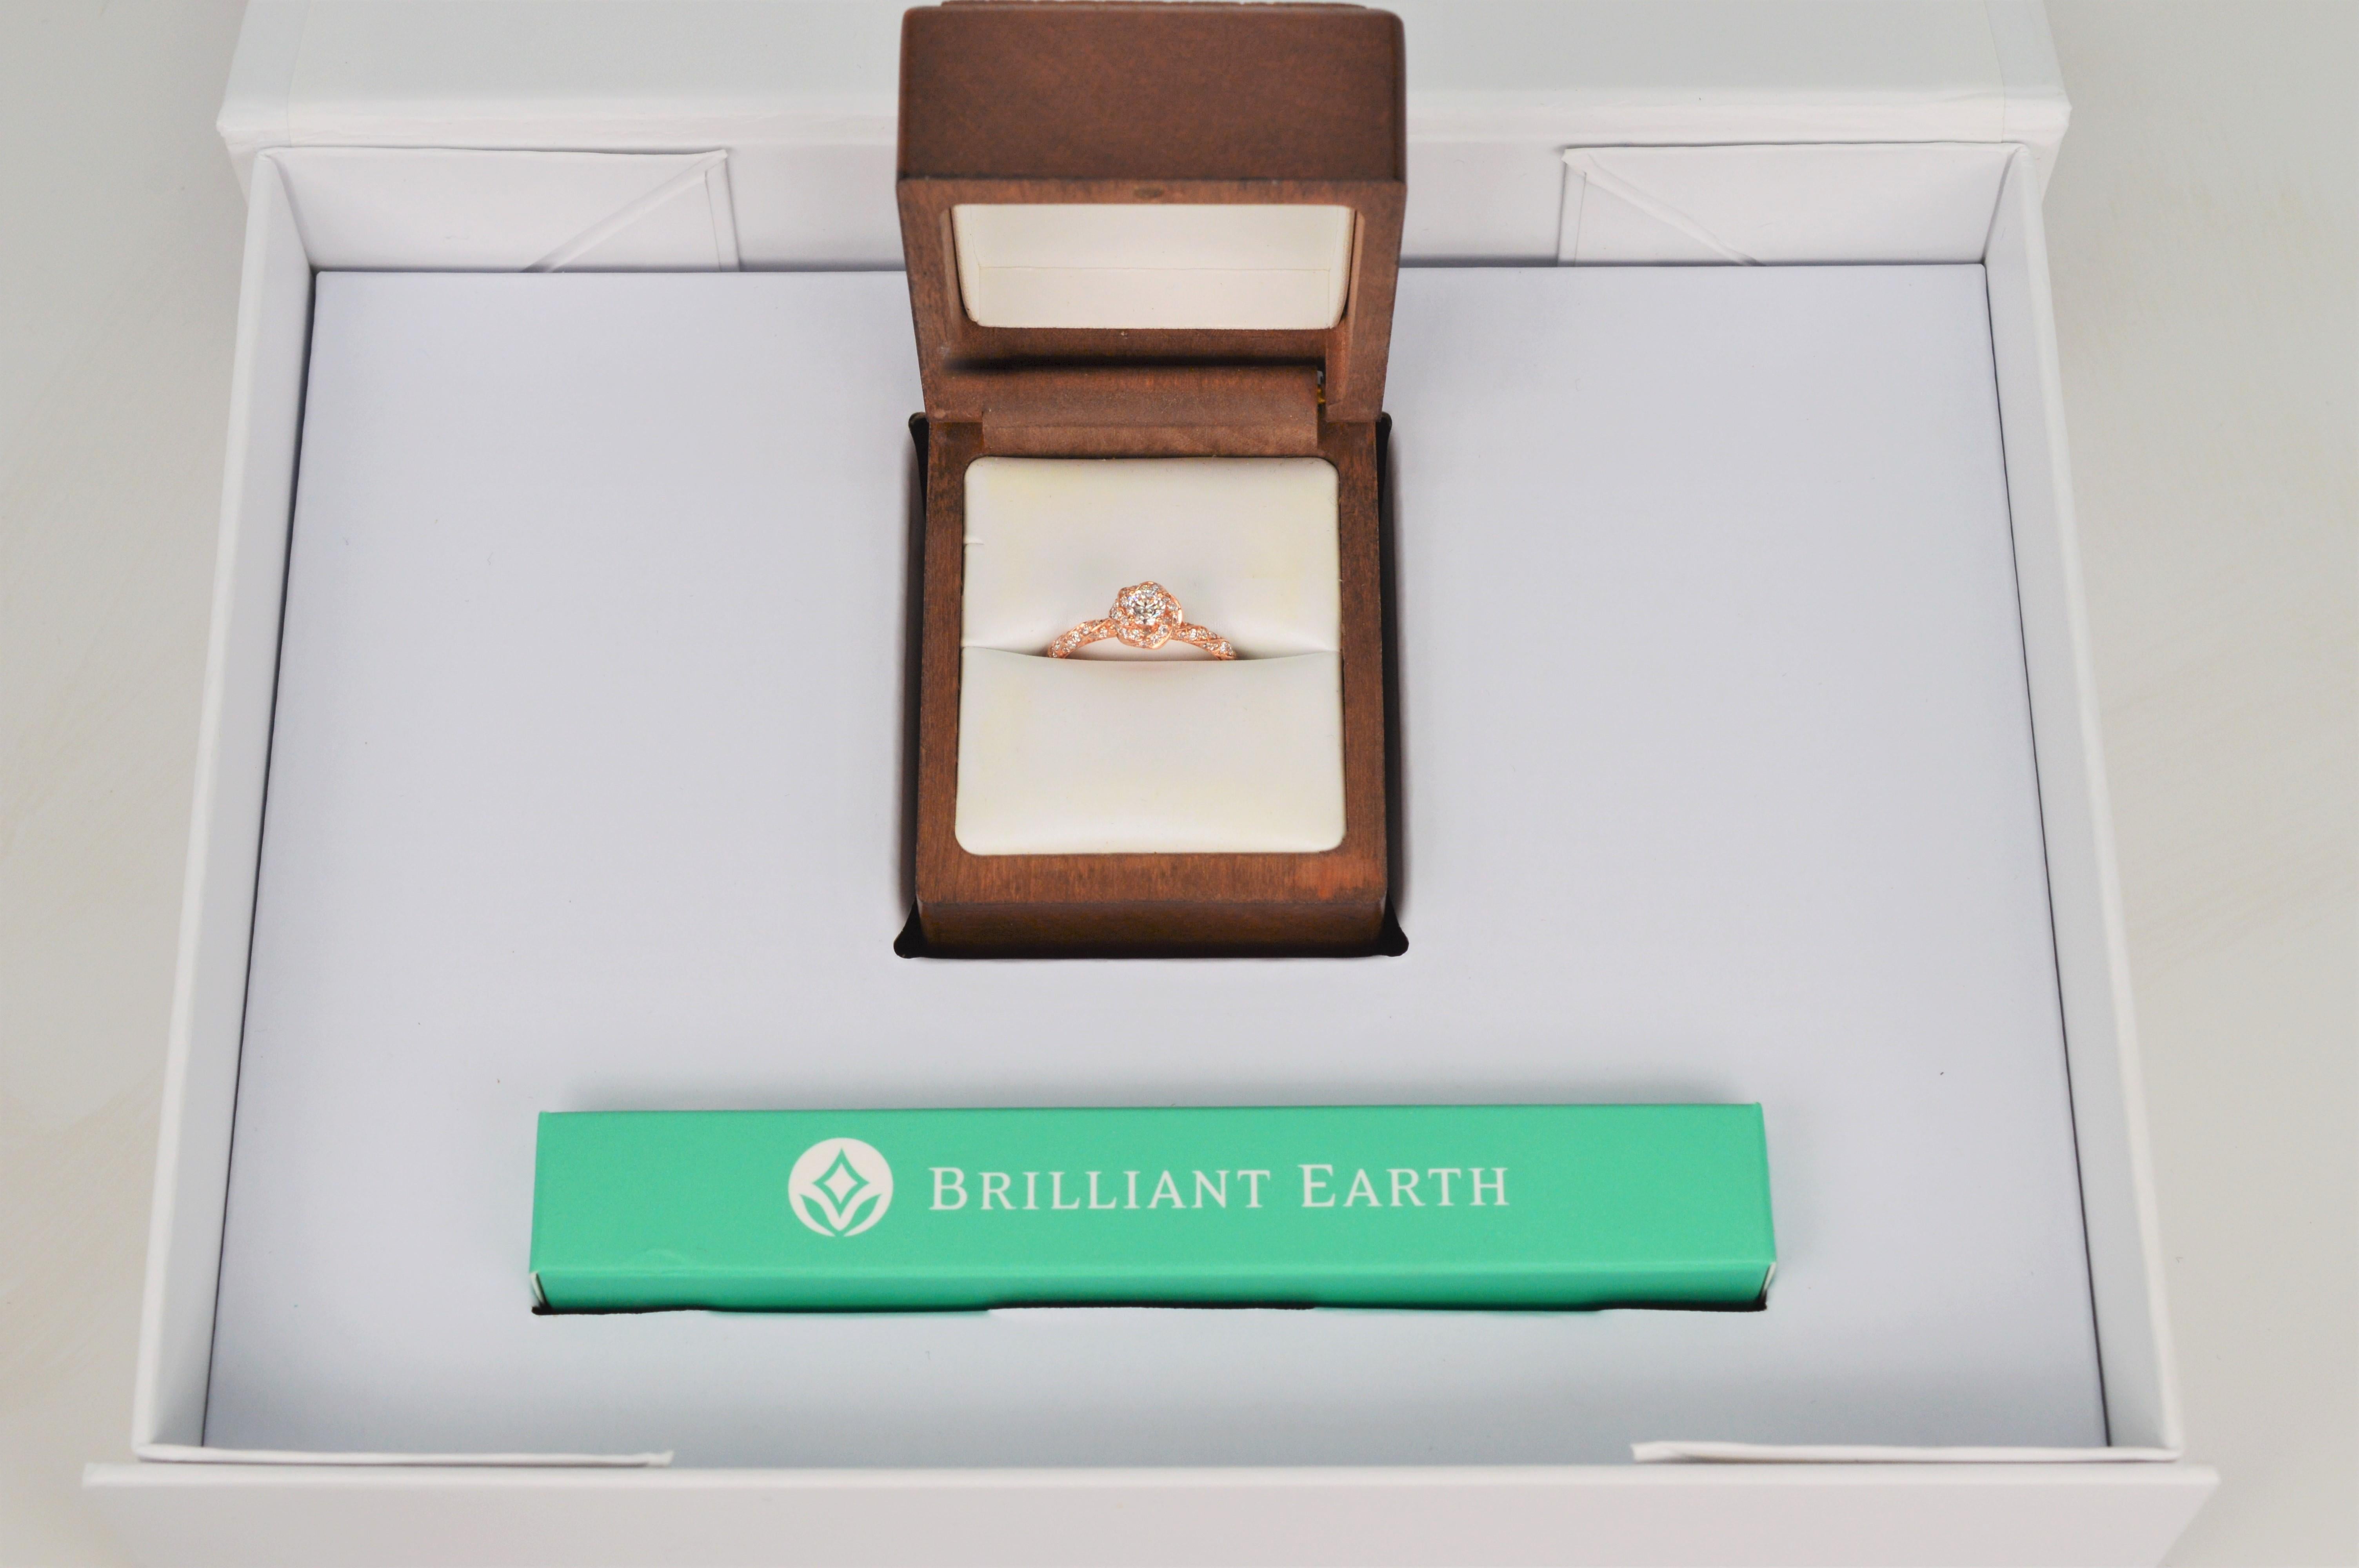 Brilliant Earth Diamond 14 Karat Rose Gold Engagement Ring w GIA Cert Box Papers For Sale 4